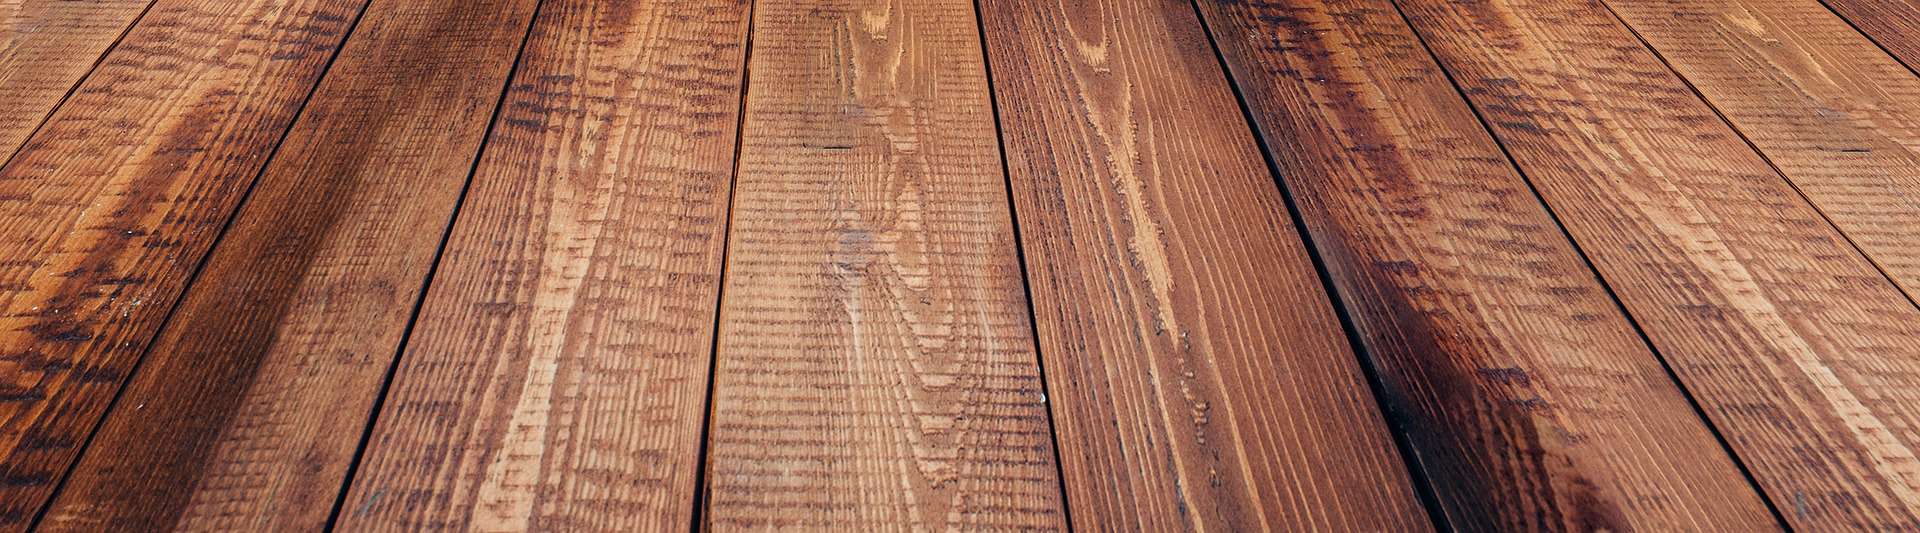 How do I renew my decking after winter?